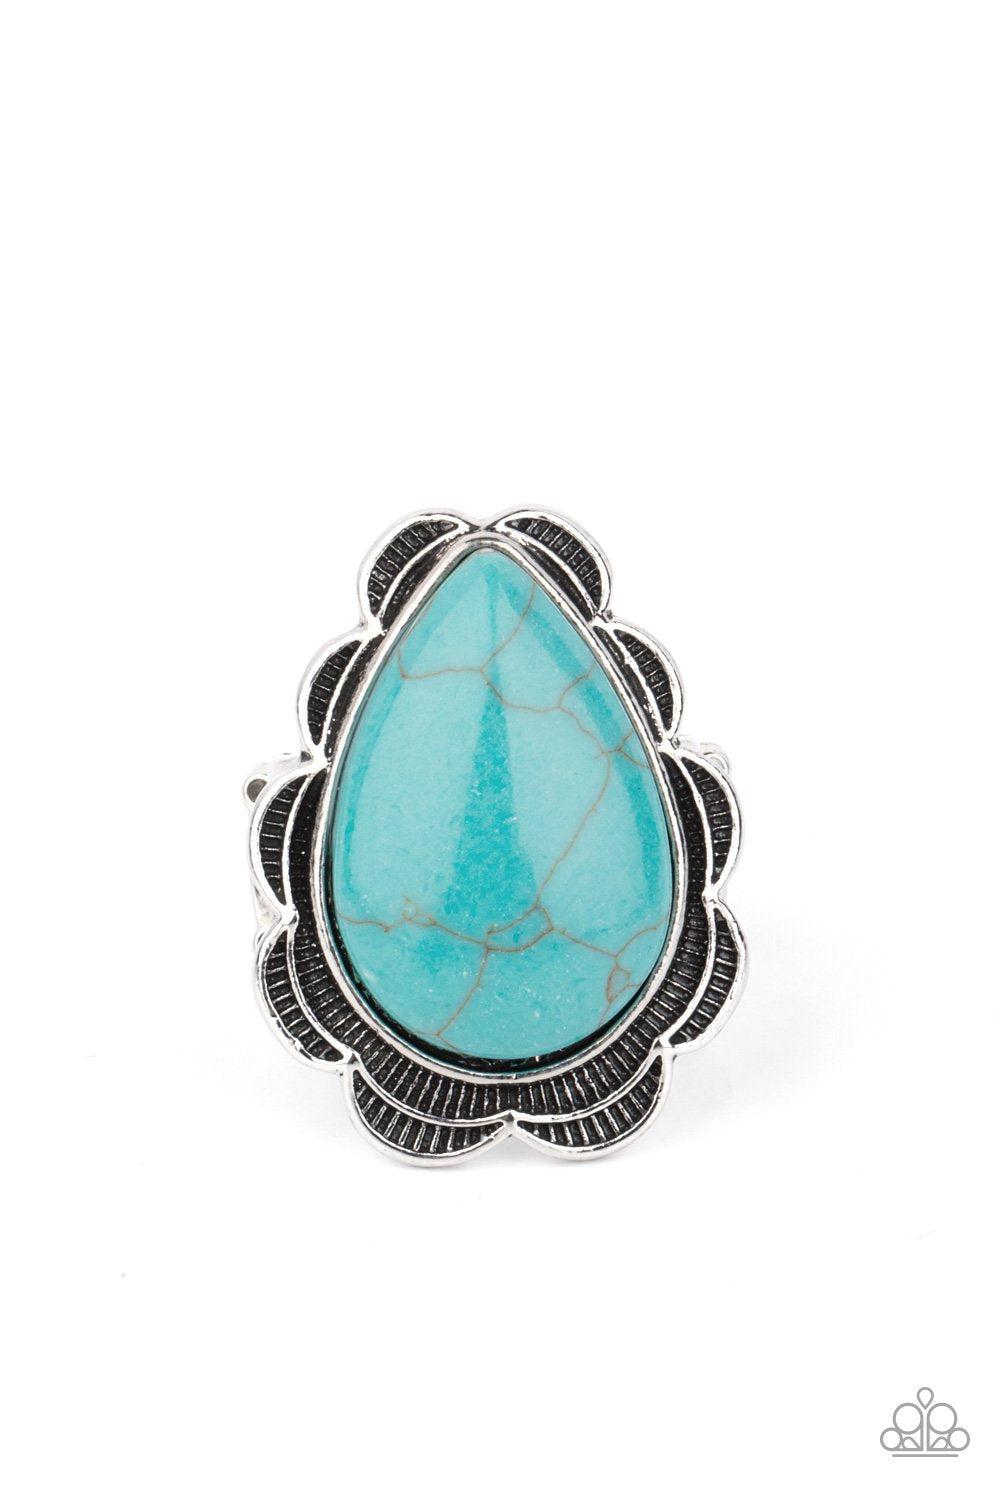 BADLANDS Romance Turquoise Blue Stone Ring - Paparazzi Accessories- lightbox - CarasShop.com - $5 Jewelry by Cara Jewels